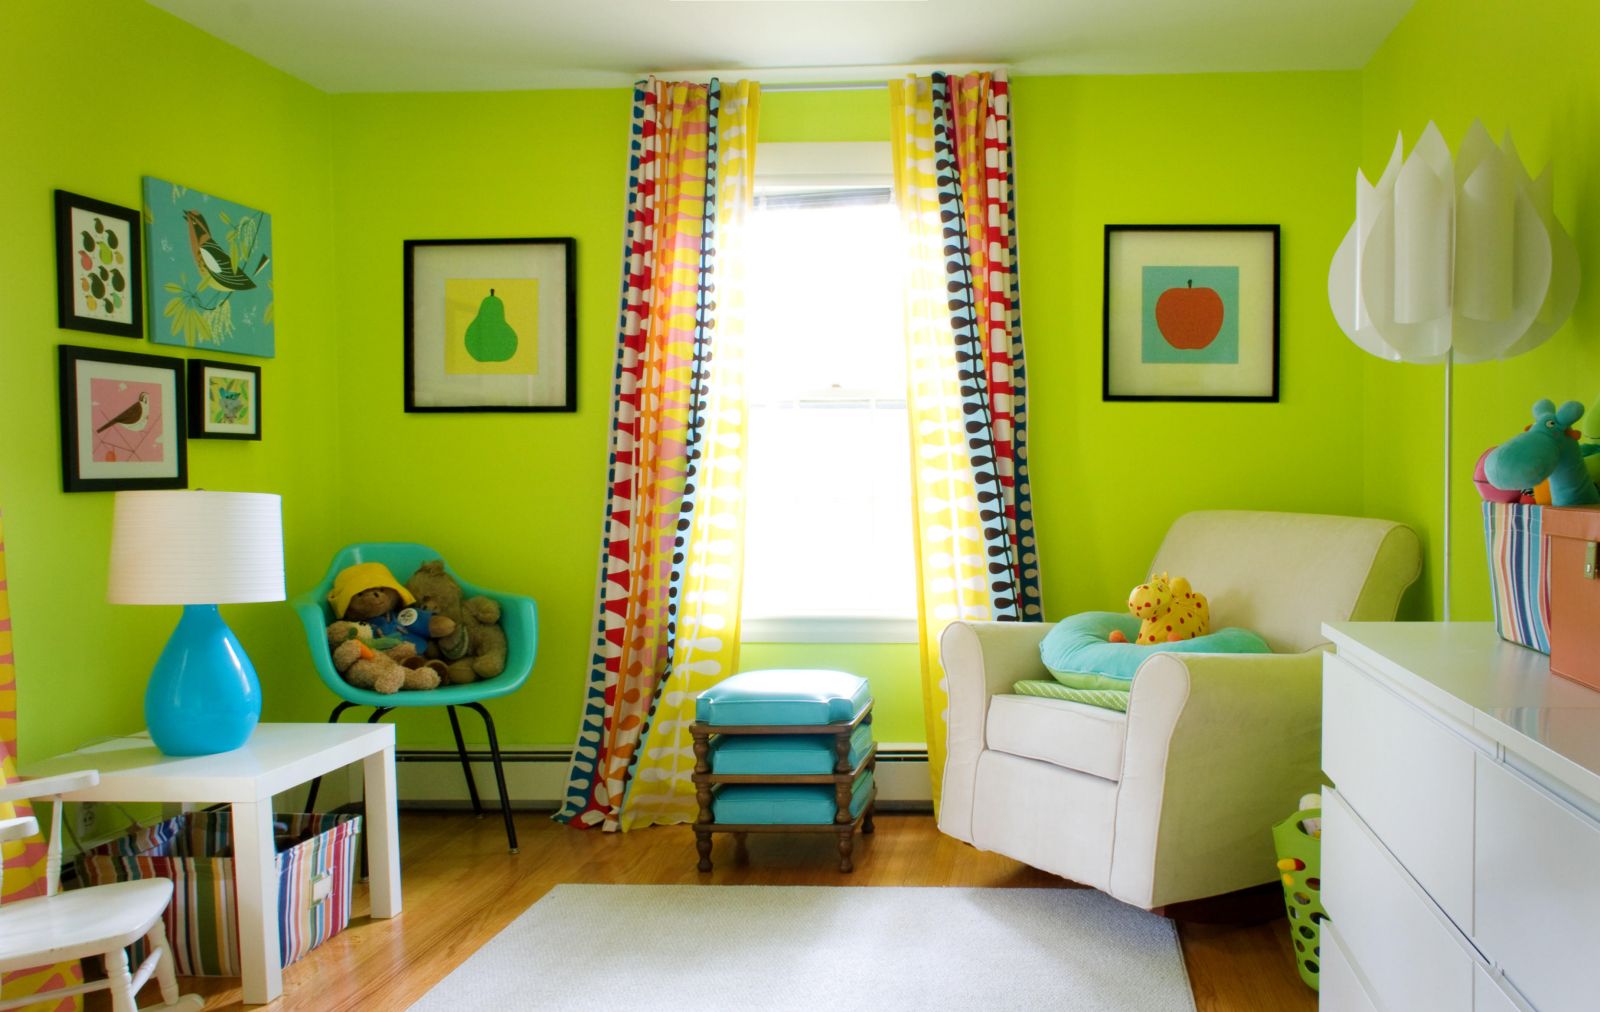 Light Green Of Extraordinary Light Green Wall Color Of Kids Room Paint Ideas Completed With White Chair And Blue Ottoman Also Furnished With White Rug And Table Lamp On Table Kids Room Colorful And Pattern Kids Room Paint Ideas